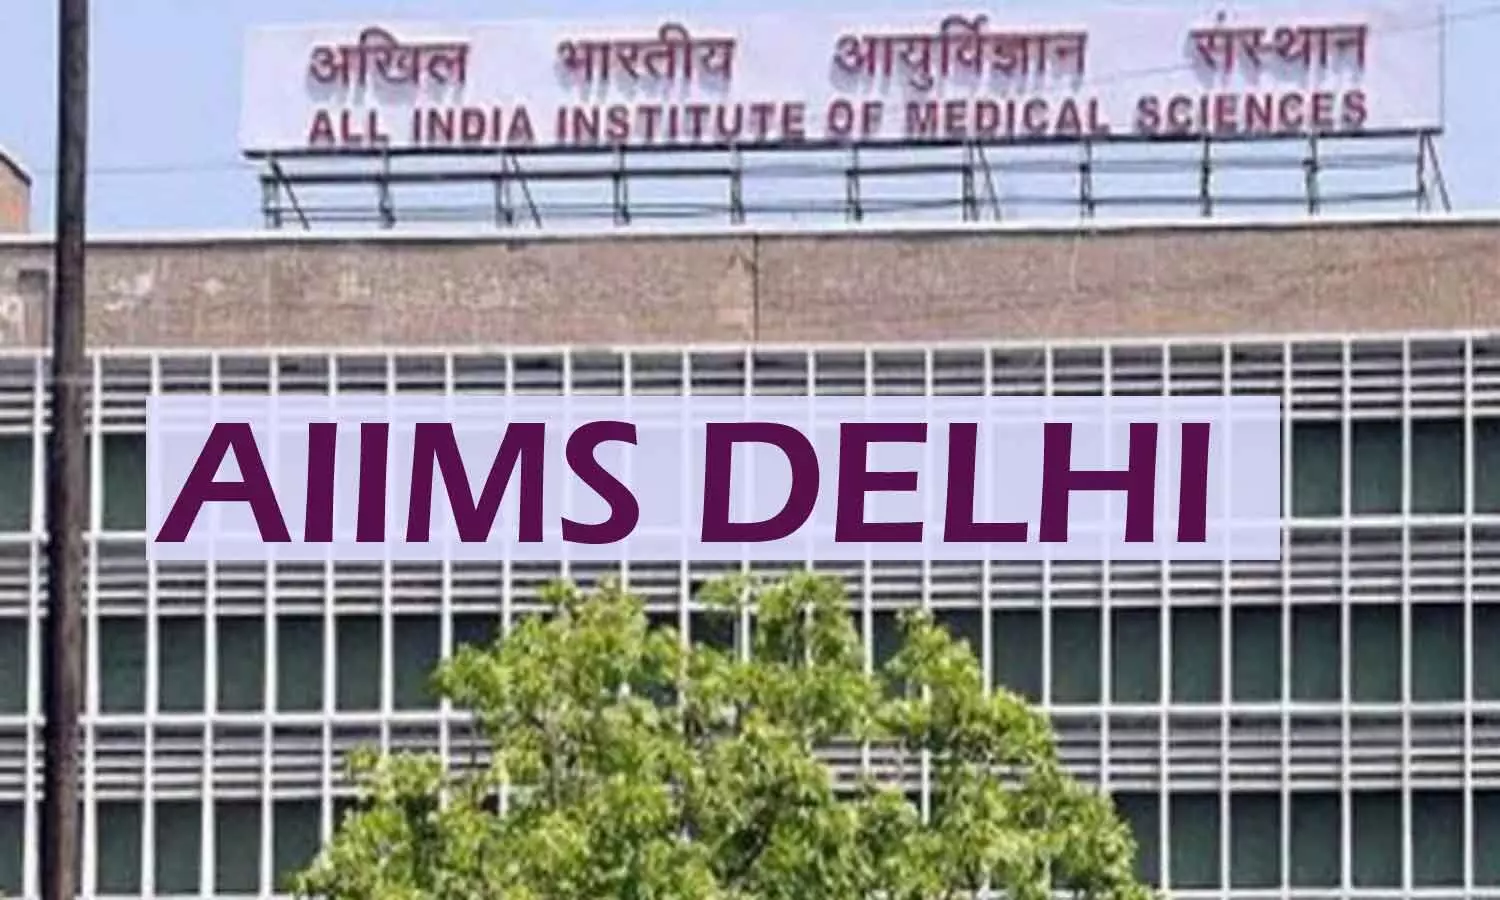 Global Road Safety Body asked Delhi L-G to Restore AIIMS Trauma Centre Services